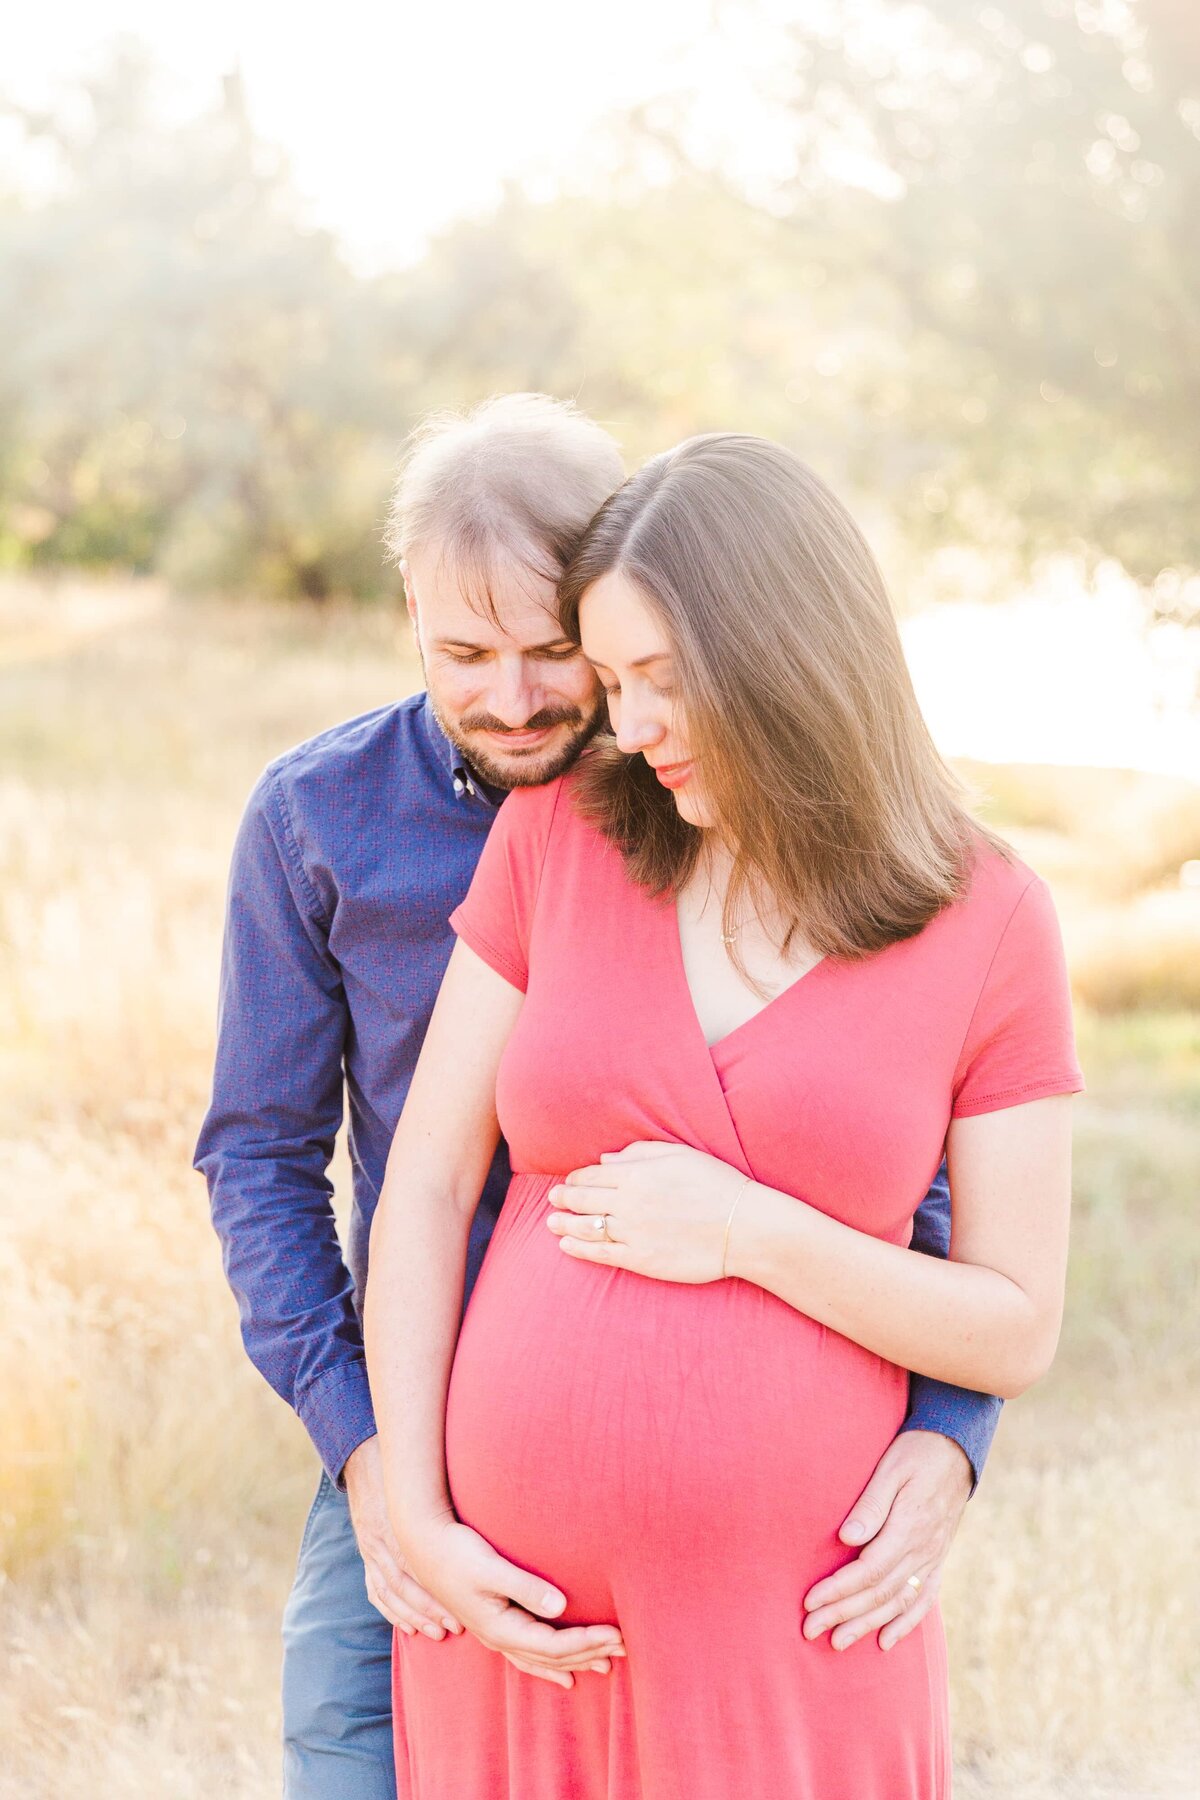 Glowy sunlight wraps around parents during maternity photo shoot